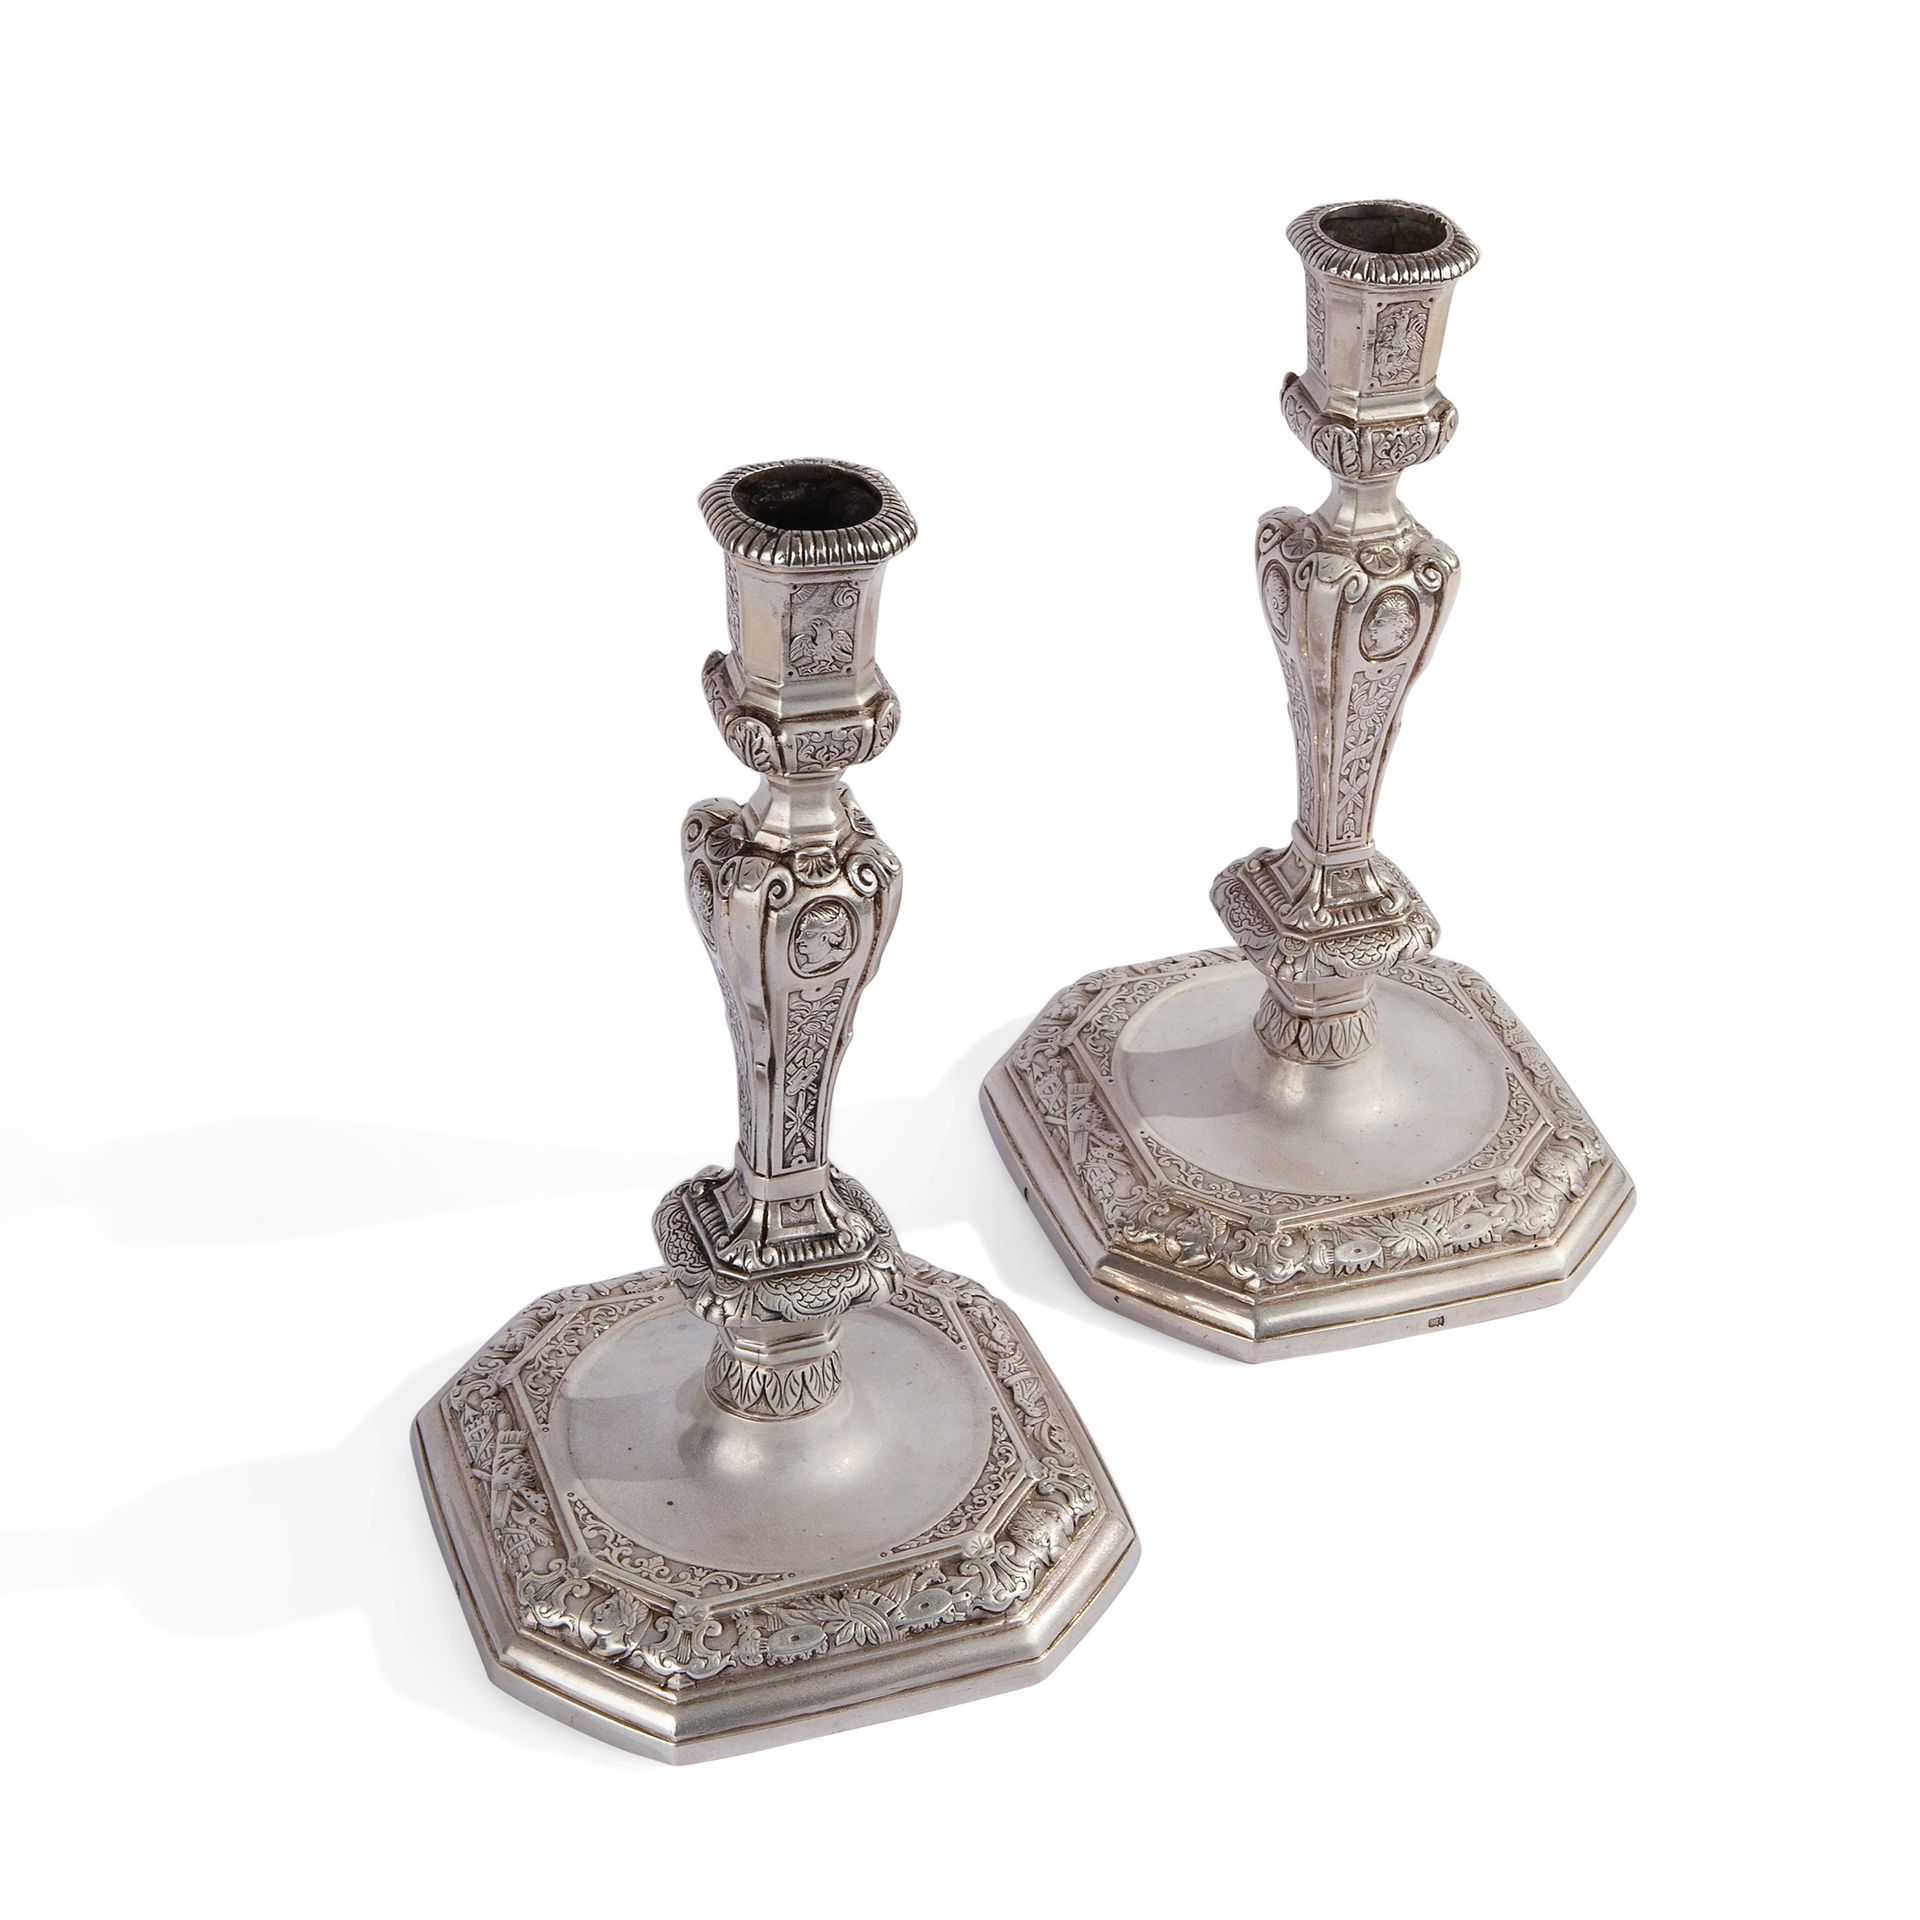 Pair of chased cast silver candlesticks, 18th century Ils portent des marques d'&hellip;